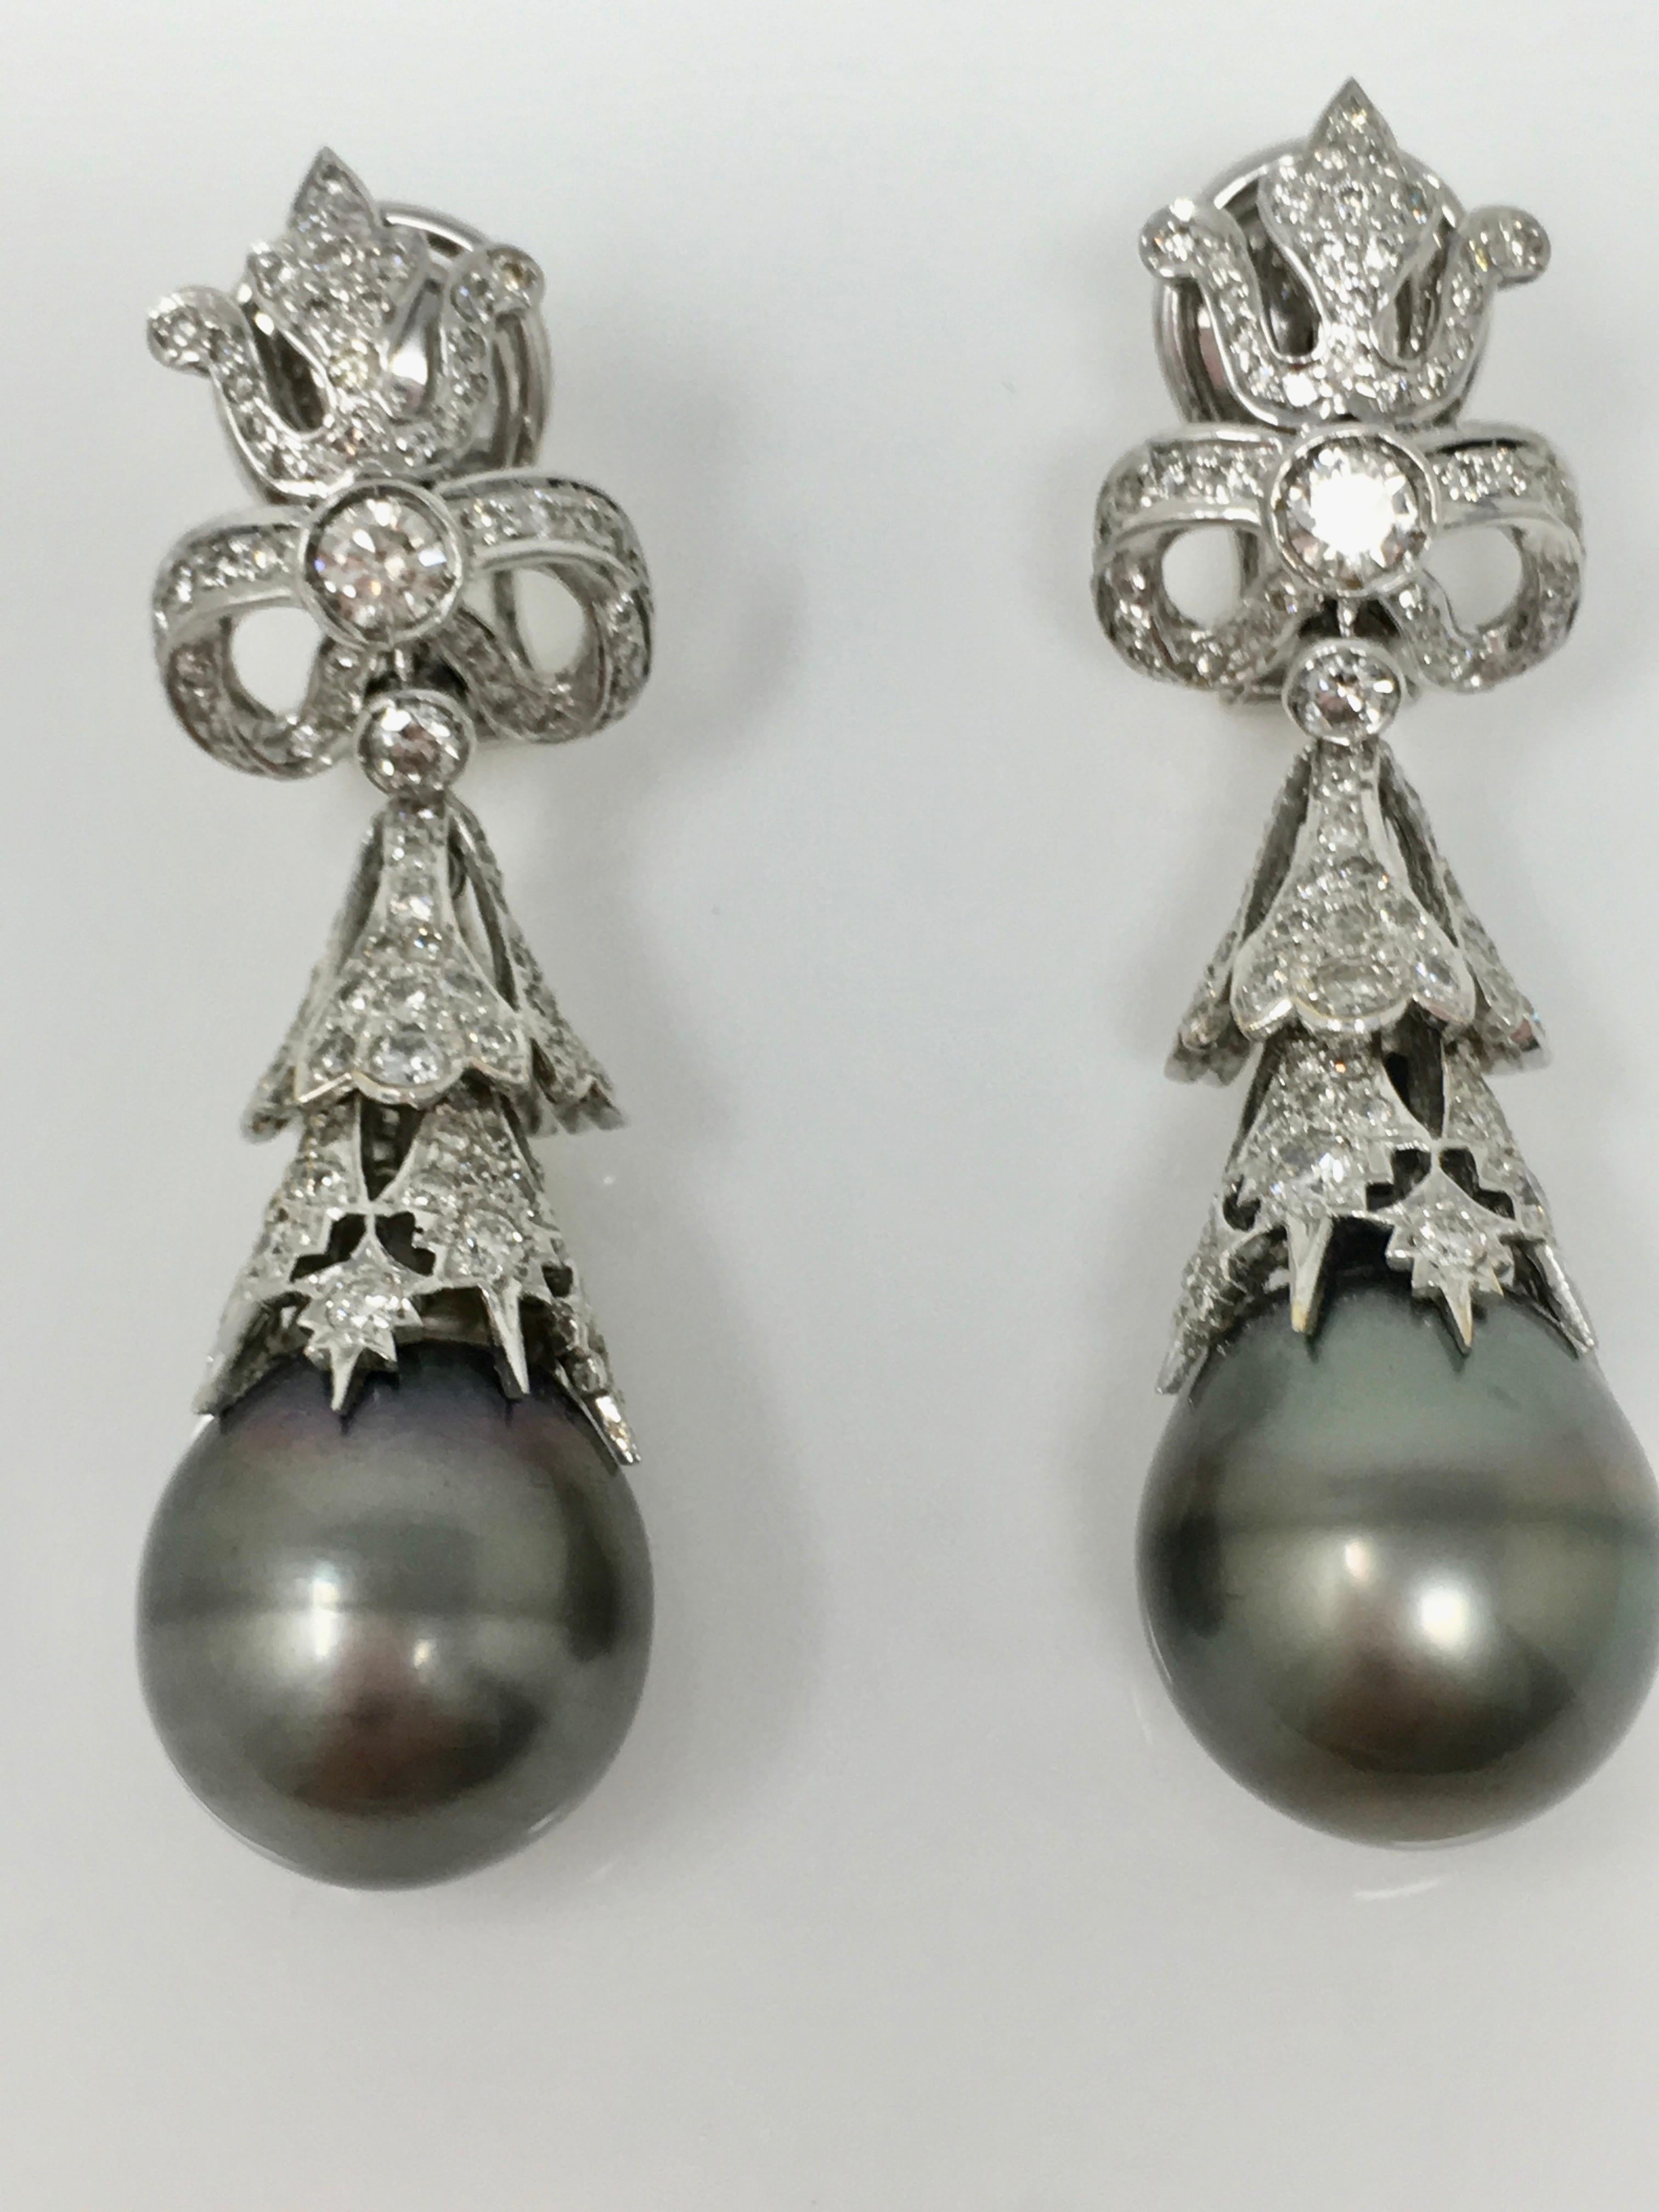 Women's 3.76 Carat White Round Brilliant Diamonds and South Sea Pearl Earrings in 18k